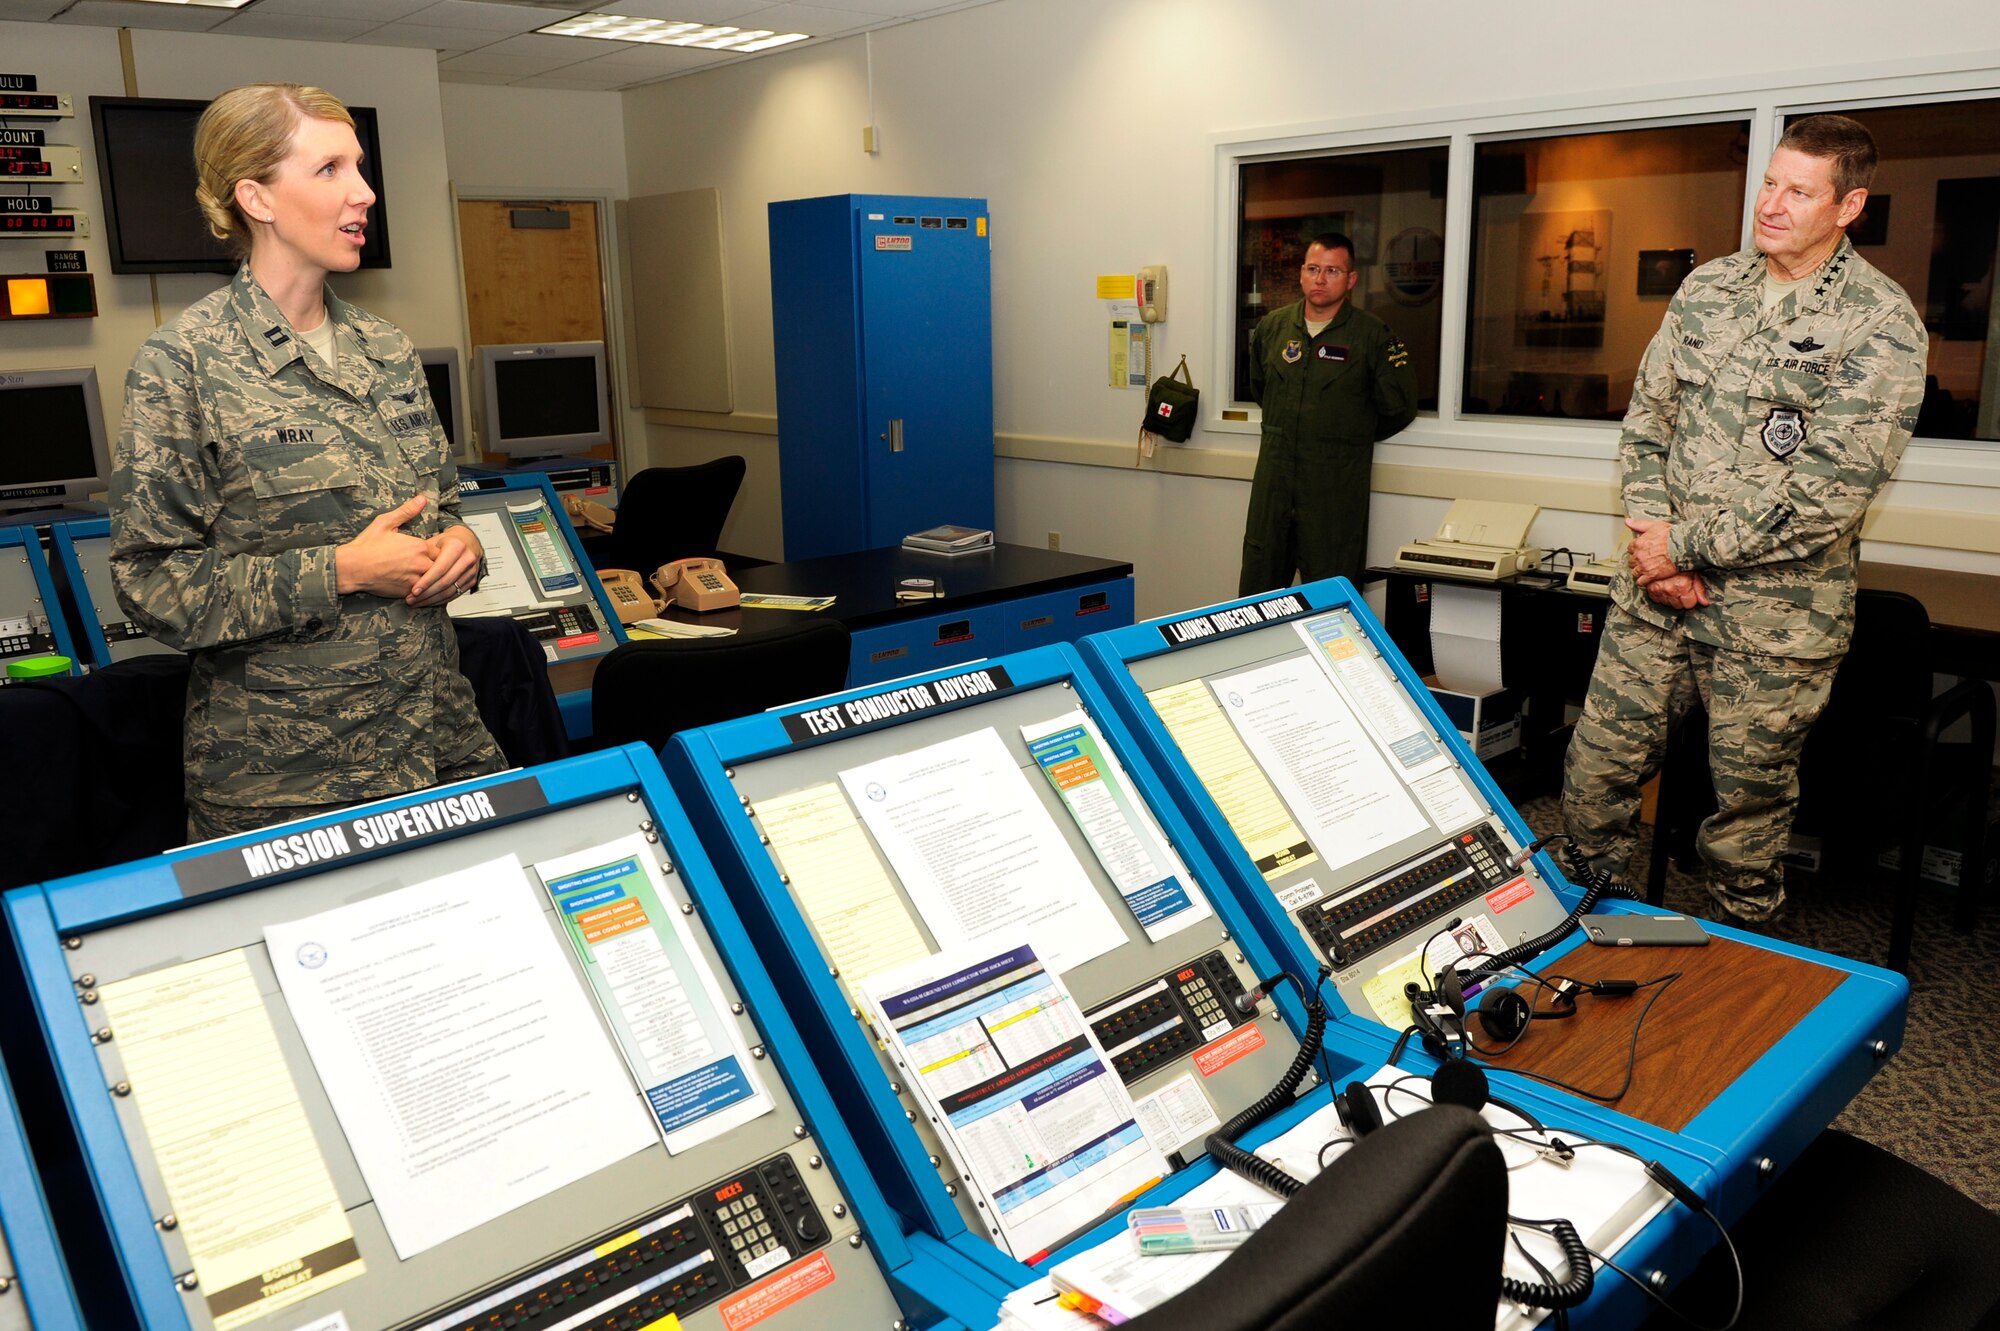 Gen. Robin Rand, commander of Air Force Global Strike Command, is briefed by Capt. Karrie Wray, 576th Flight Test Squadron ICBM test manager, during a tour of the 576th FLTS Aug. 18, 2015, Vandenberg Air Force Base, Calif. (U.S. Air Force photo by Staff Sgt. Jim Araos/Released)